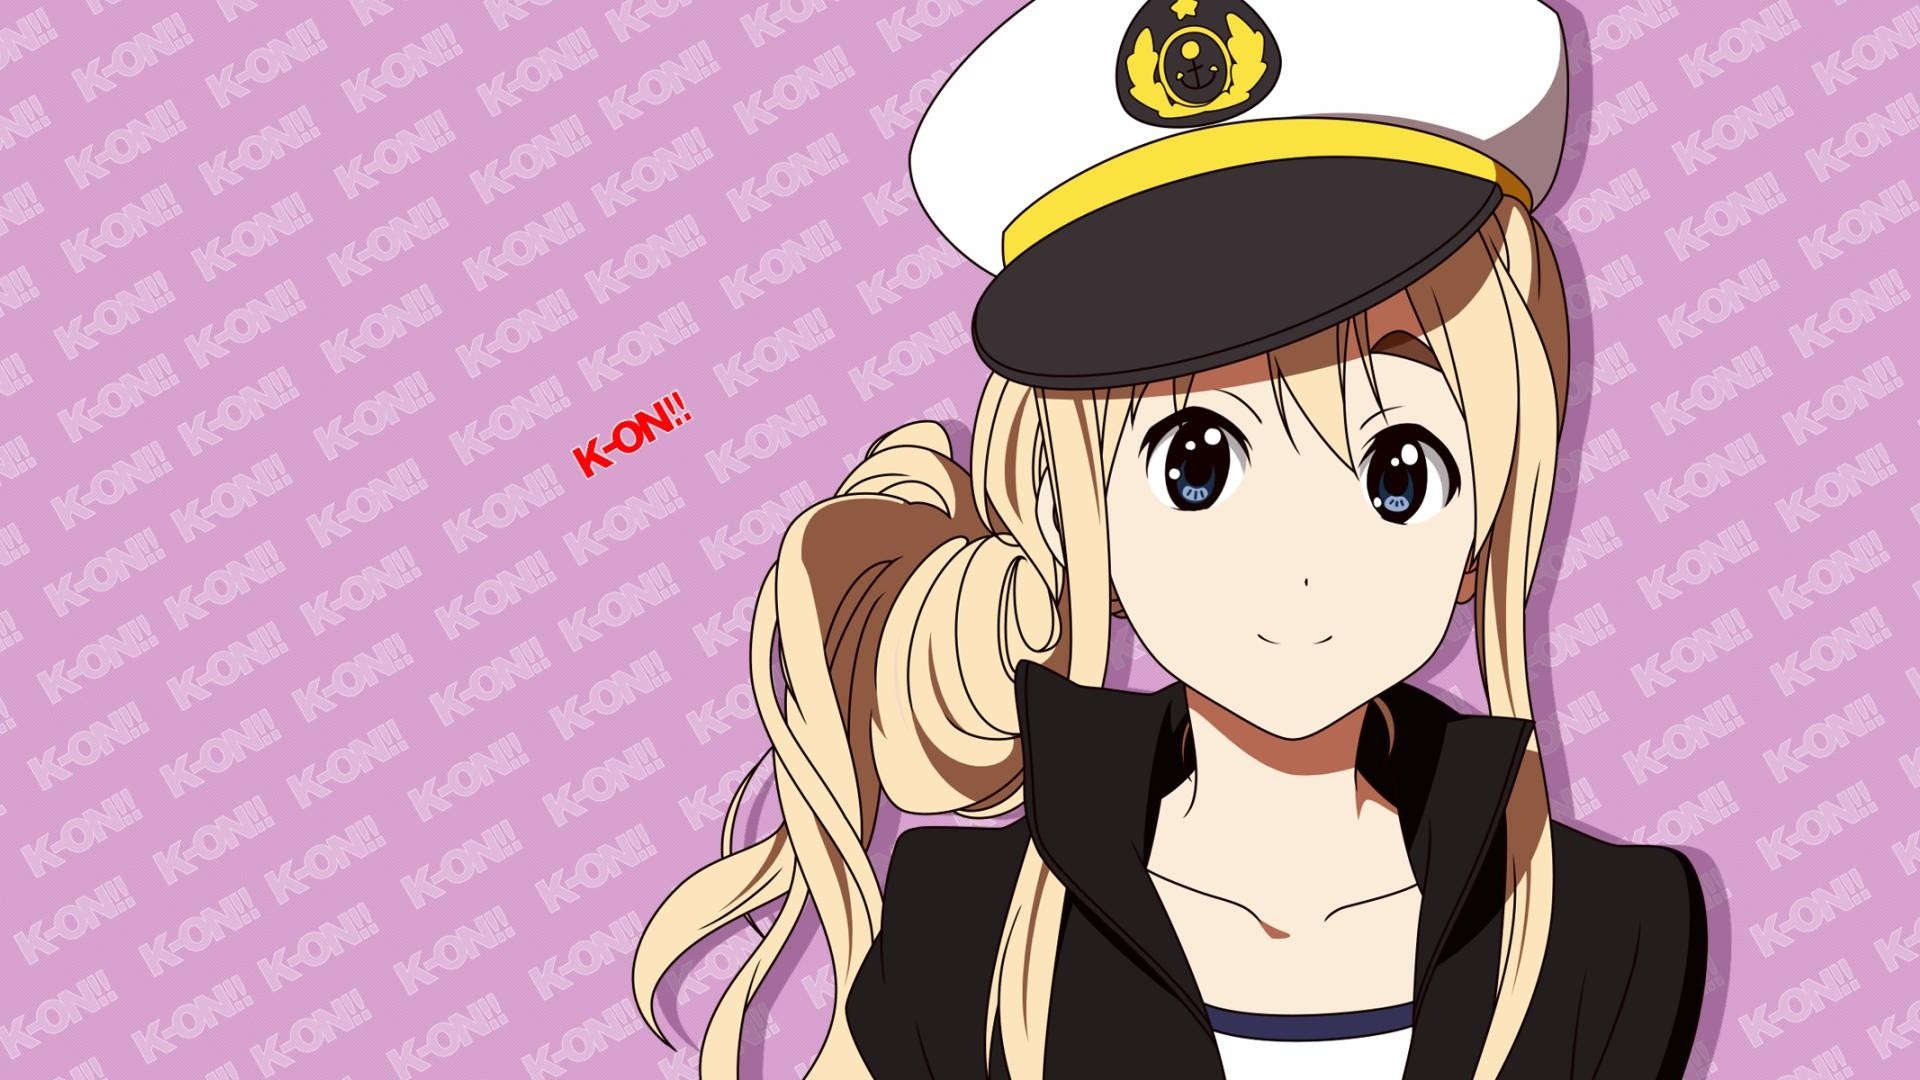 Anime 1920x1080 K-ON! anime girls anime blonde hat pink background women with hats long hair smiling dark eyes looking at viewer